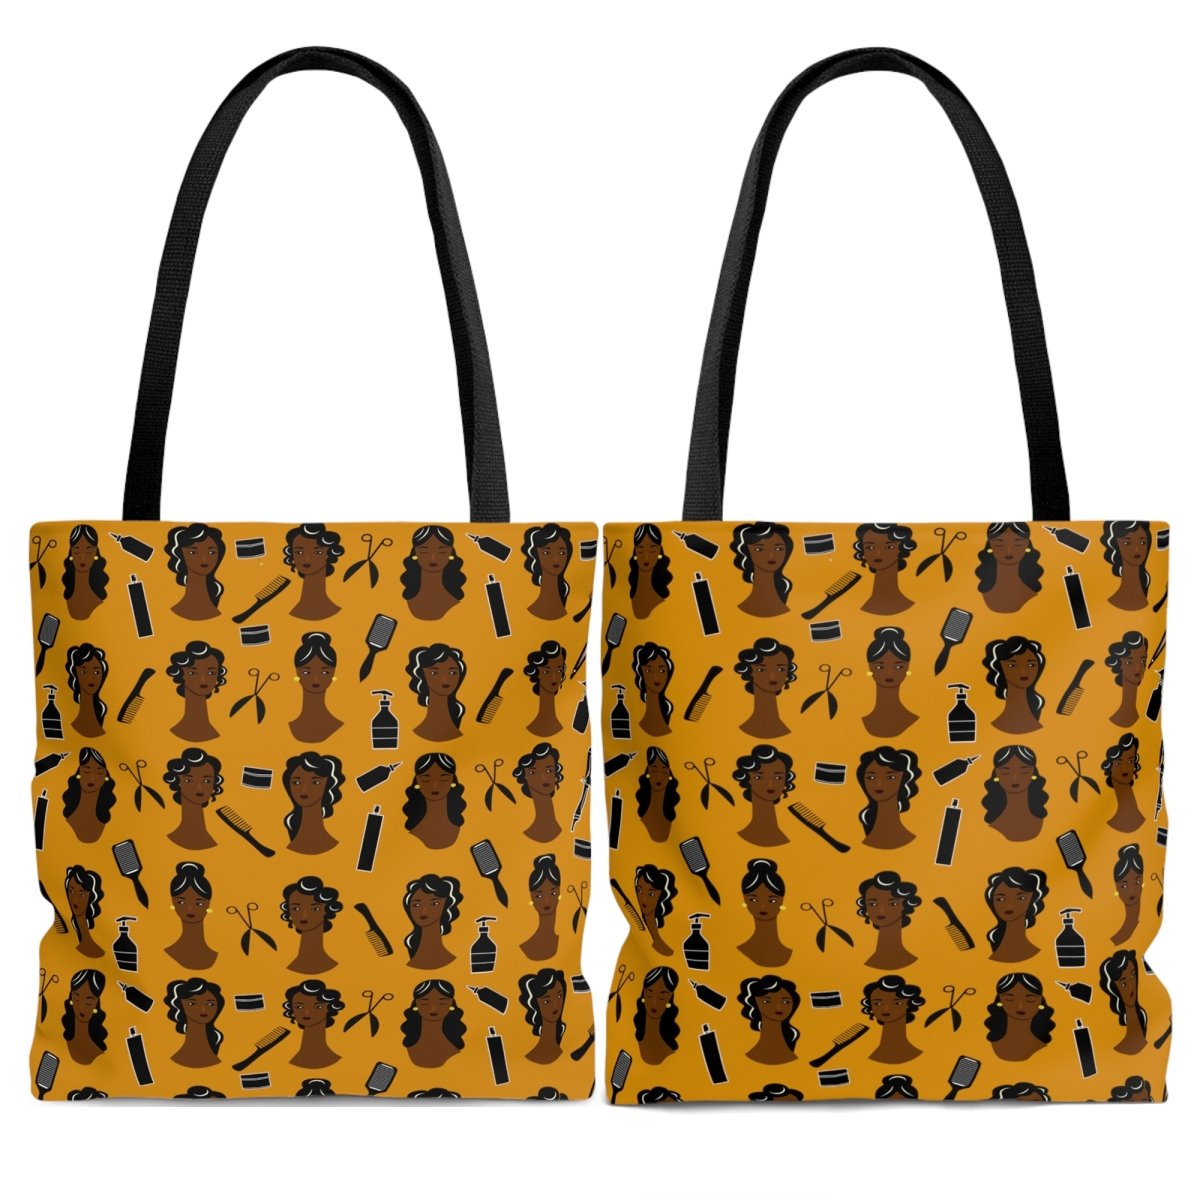 Women Hairstyles Tote Bag - The Trini Gee